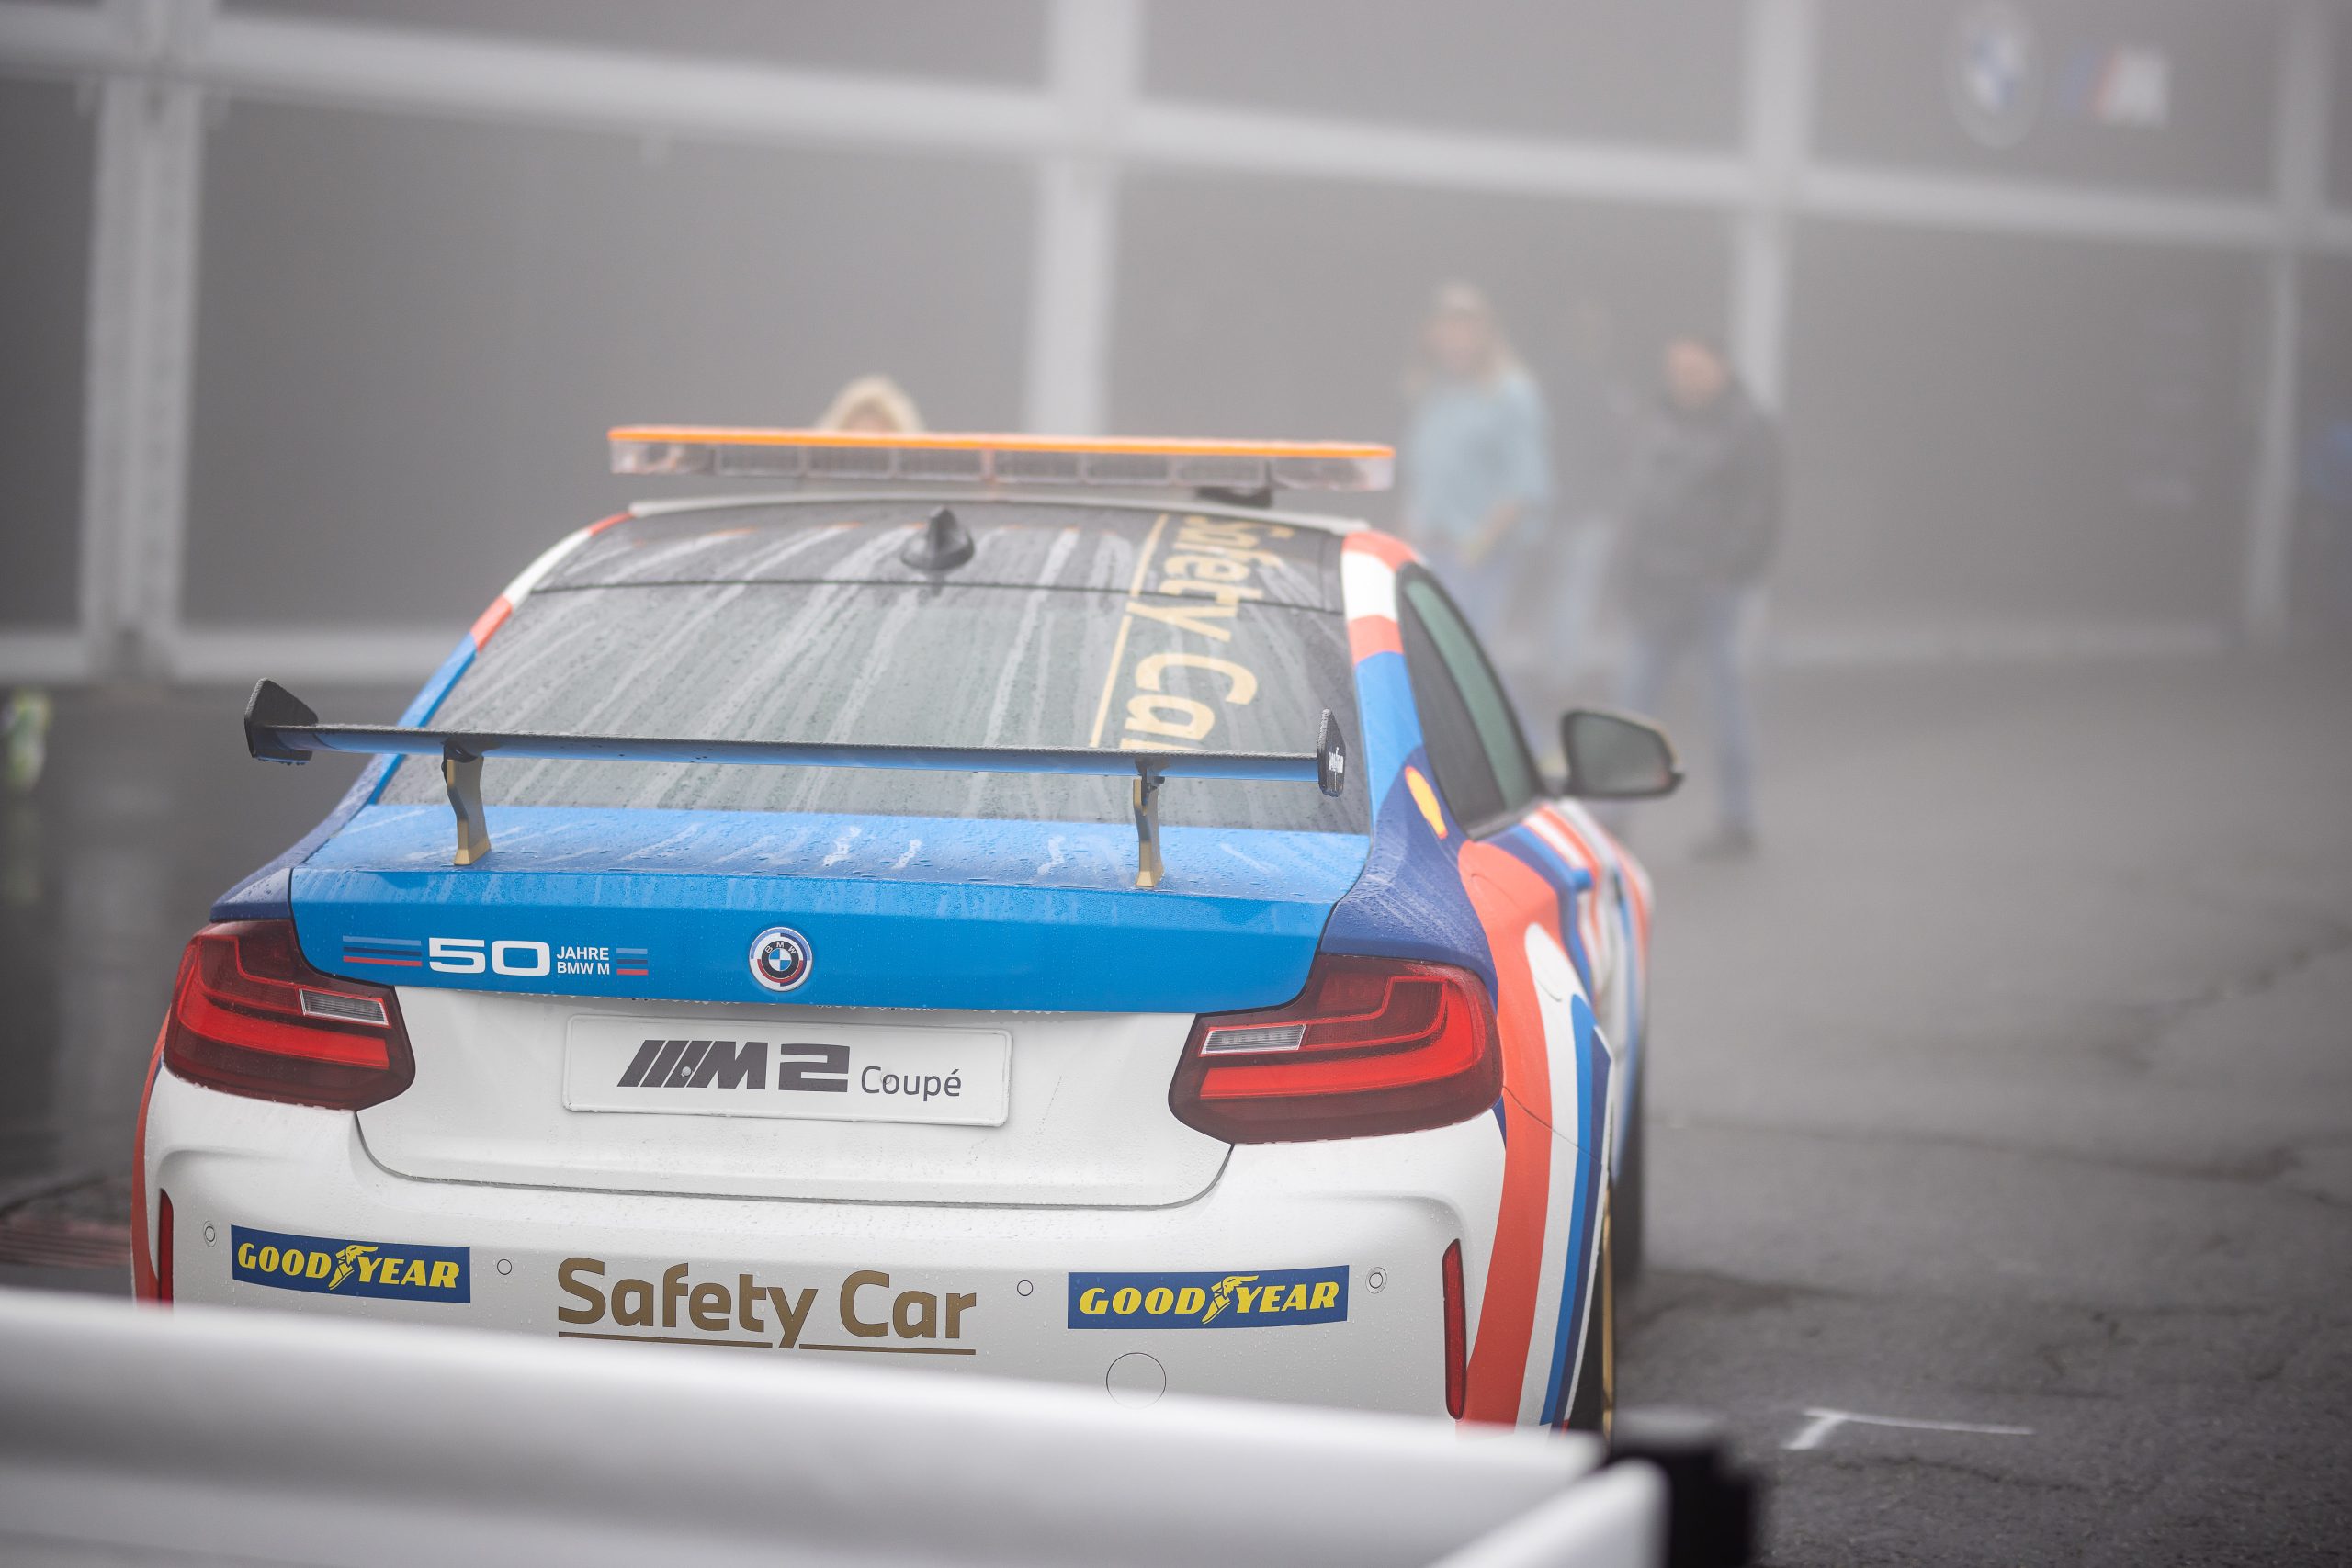 Eifel weather prevents first race of the weekend